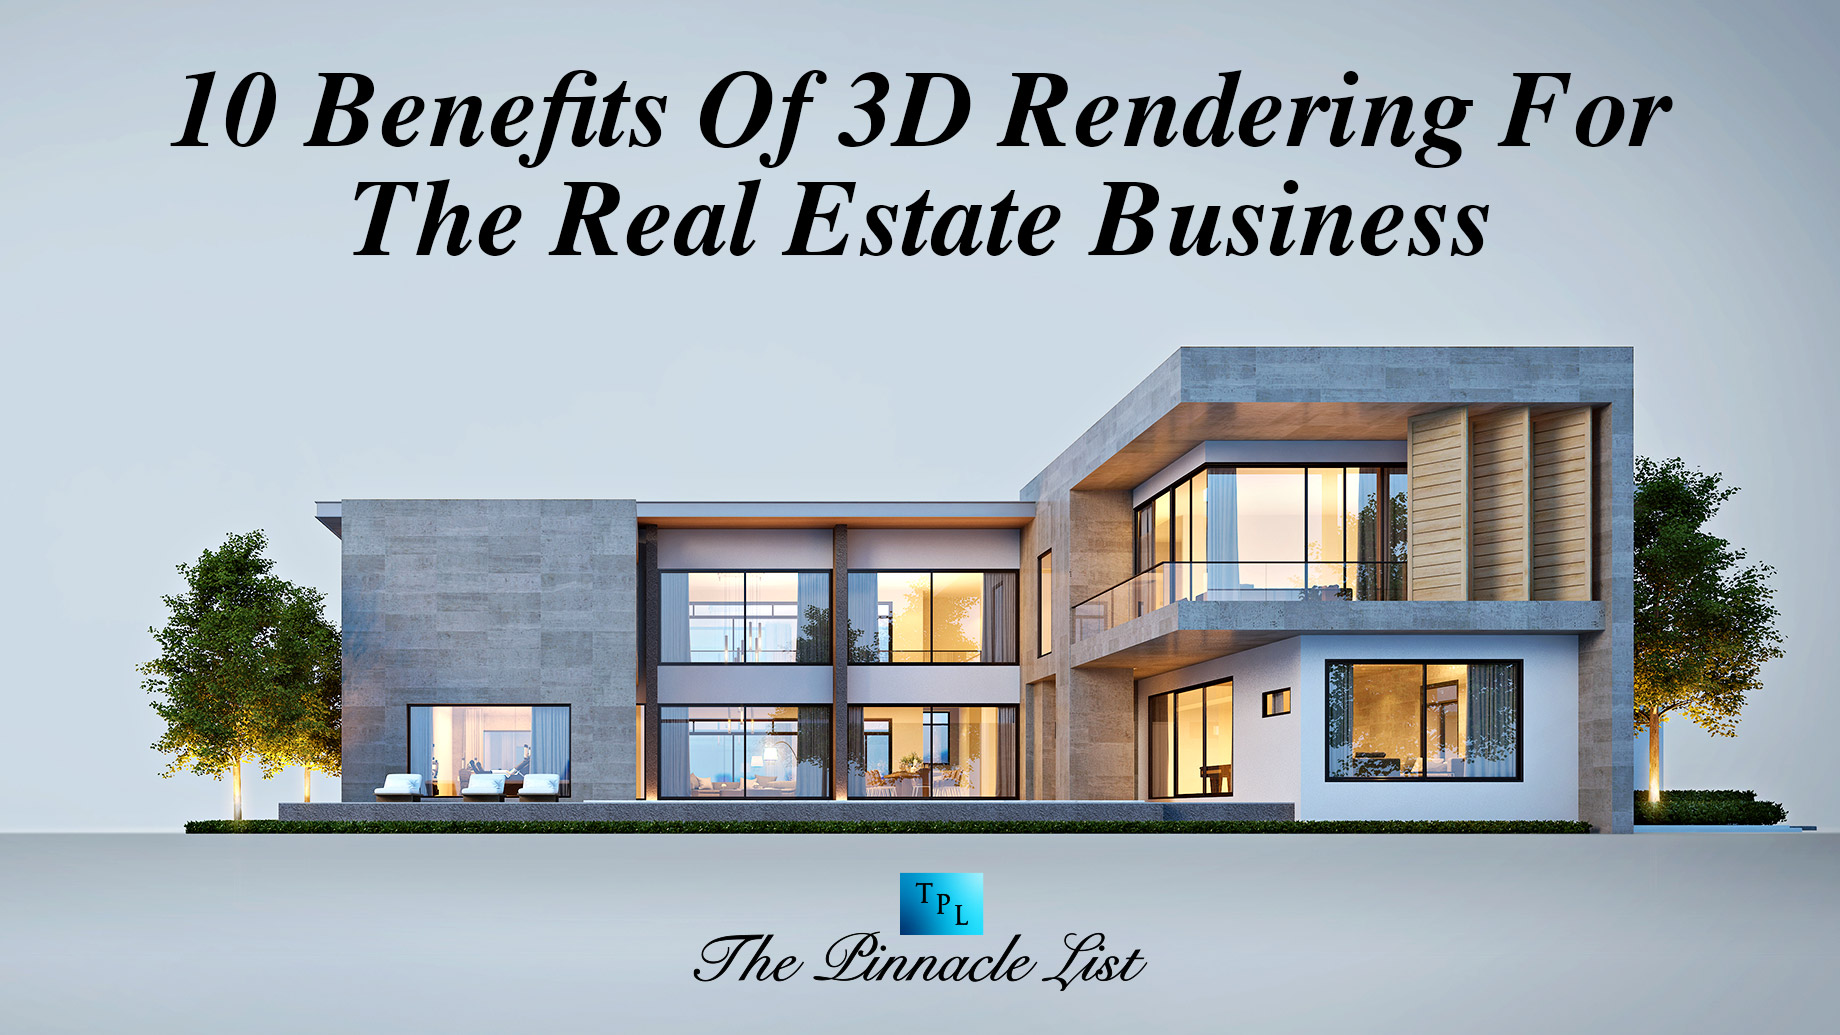 10 Benefits Of 3D Rendering For The Real Estate Business